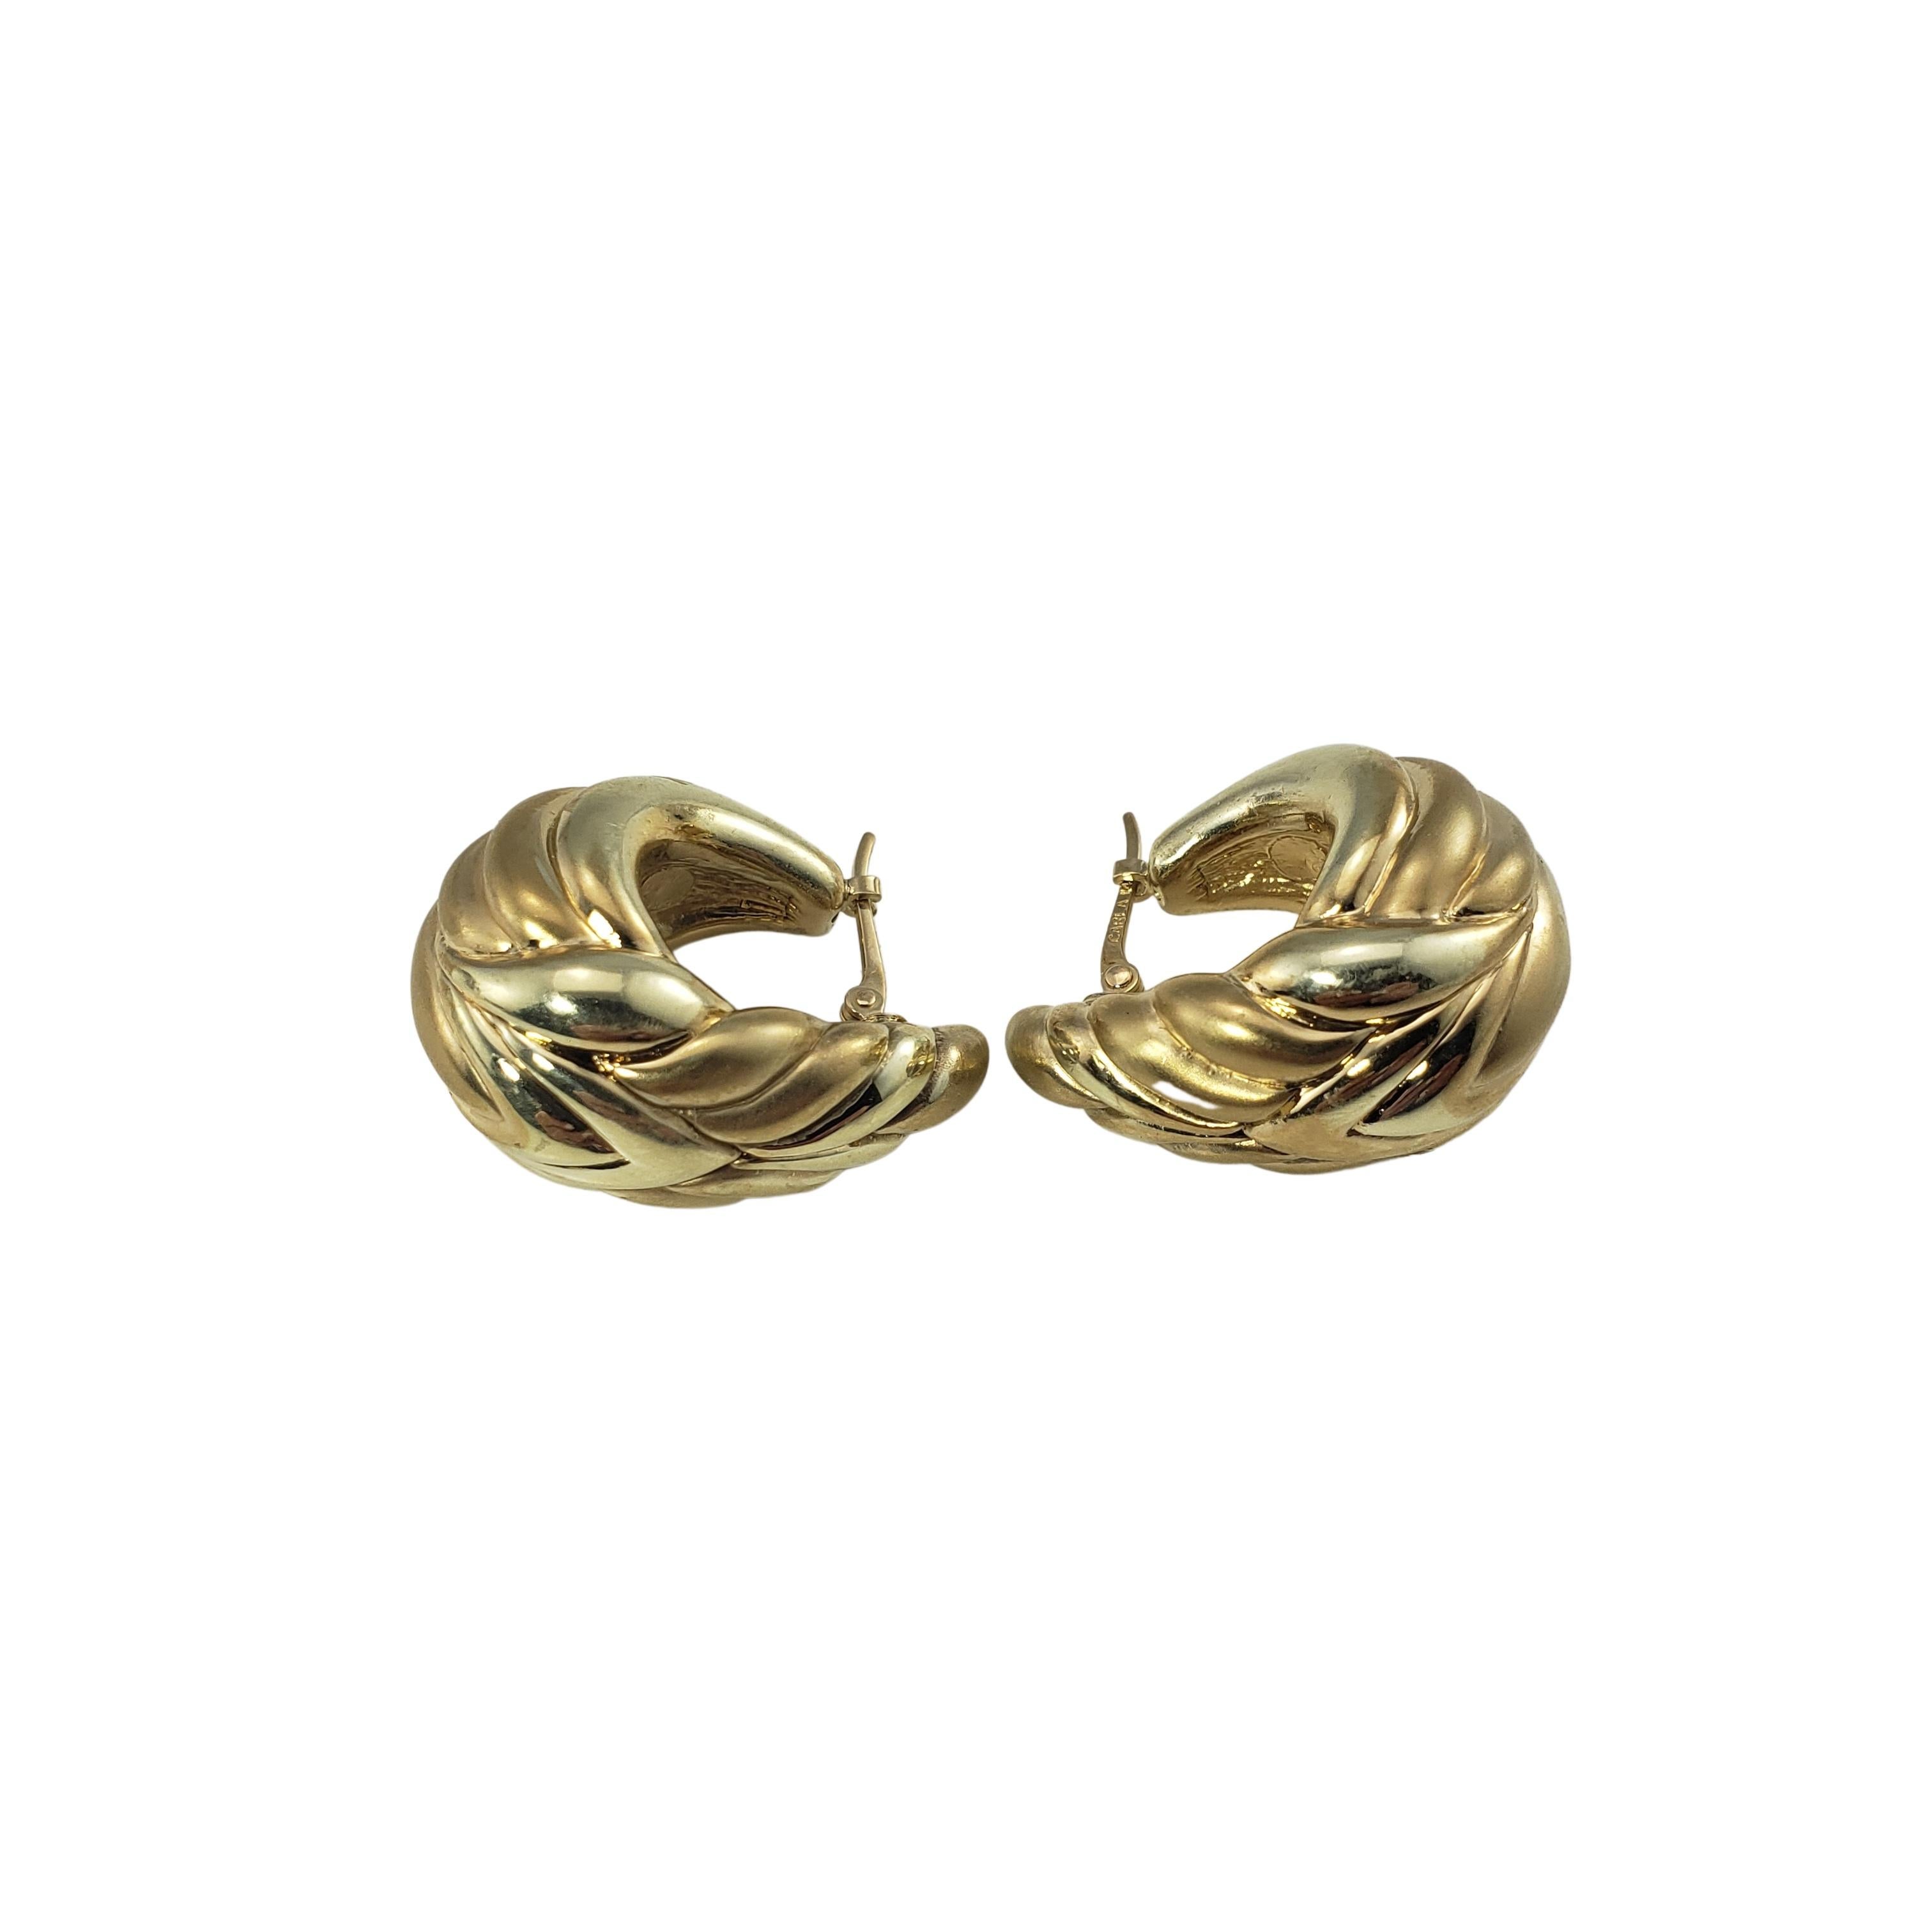 14 Karat Yellow Gold Hoop Earrings-

These elegant hoop earrings are crafted in beautifully detailed 14K yellow gold.

Size: 23 mm x 13 mm

Weight:  4.4 dwt. /  6.9 gr.

Stamped: CARLA  14K

Very good condition, professionally polished.

Will come